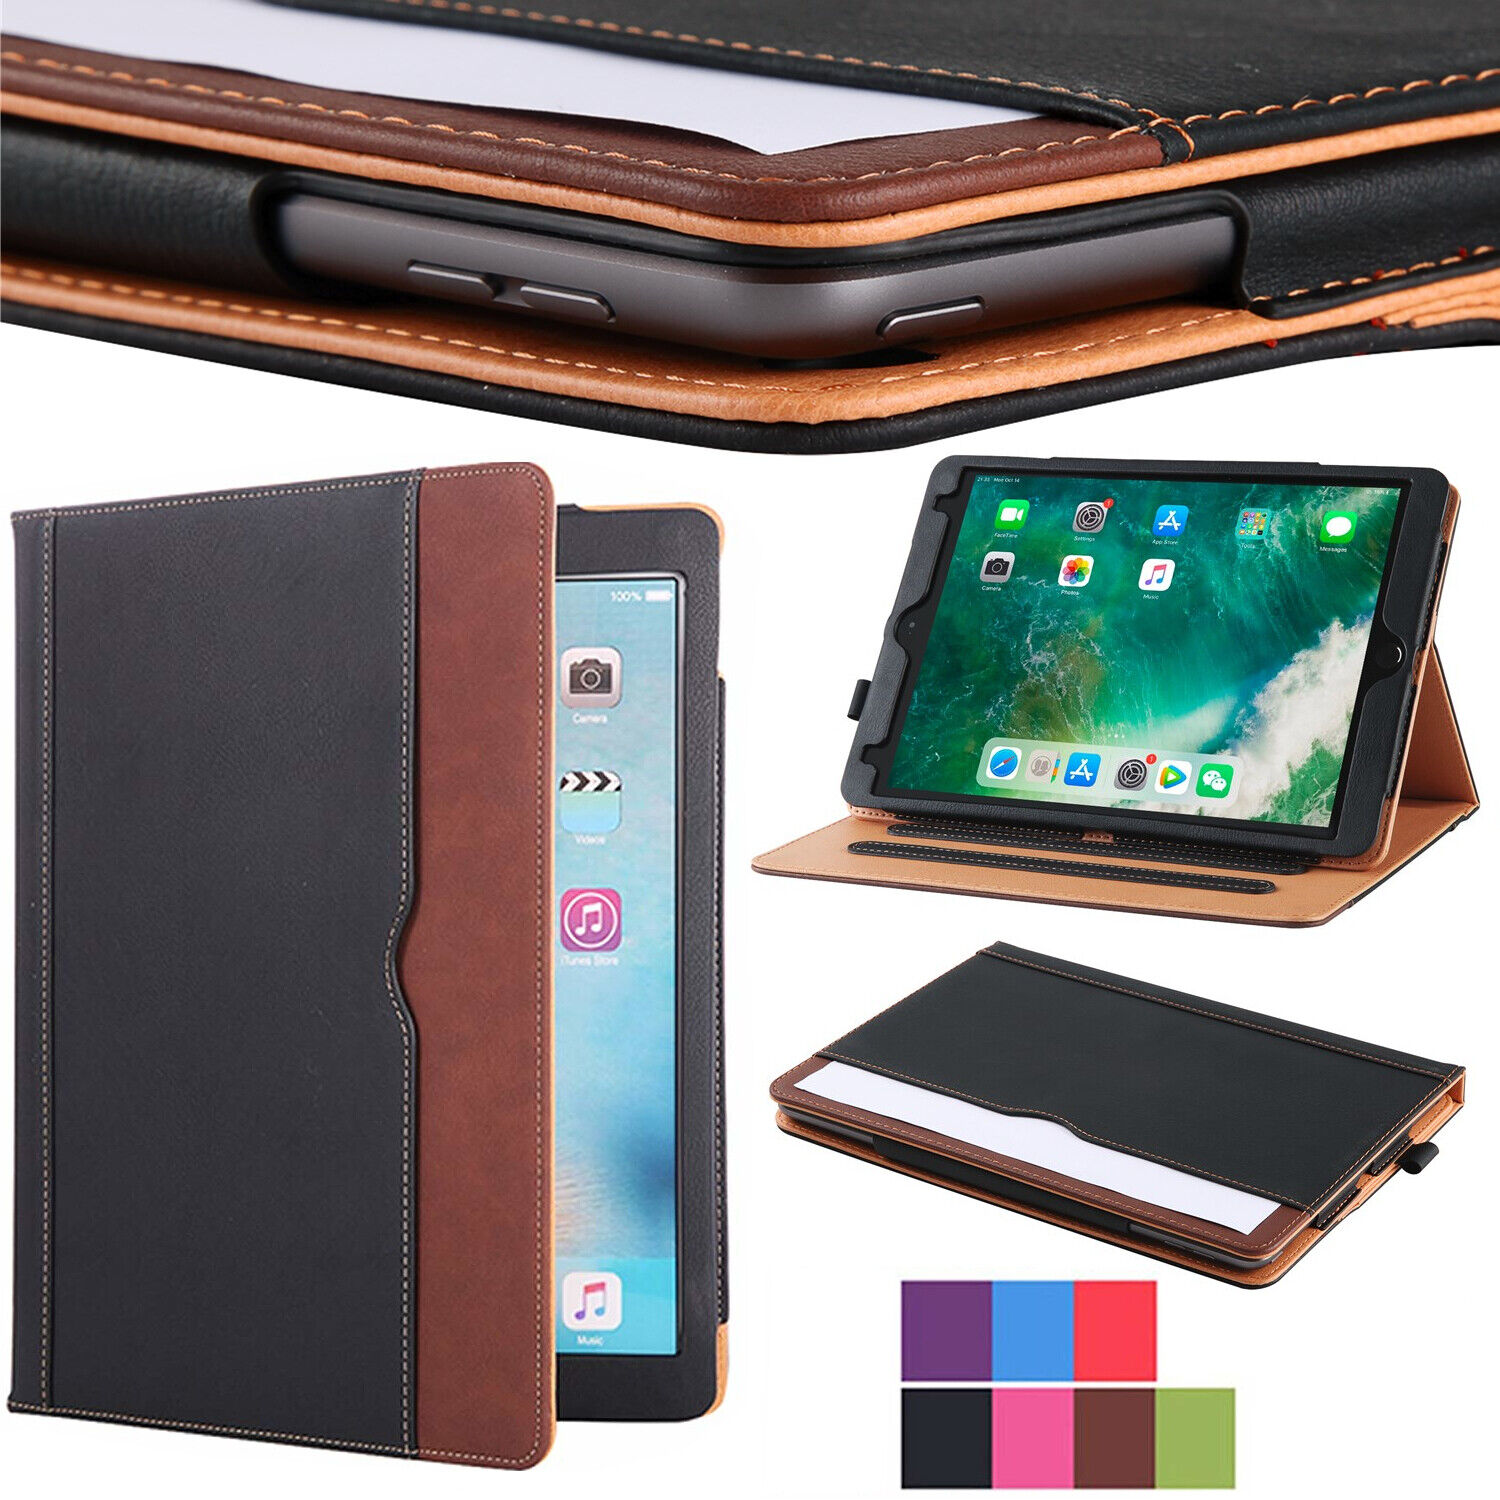 Soft Leather iPad Case Smart Cover Folio Stand For Apple Air 5th Gen 10.9